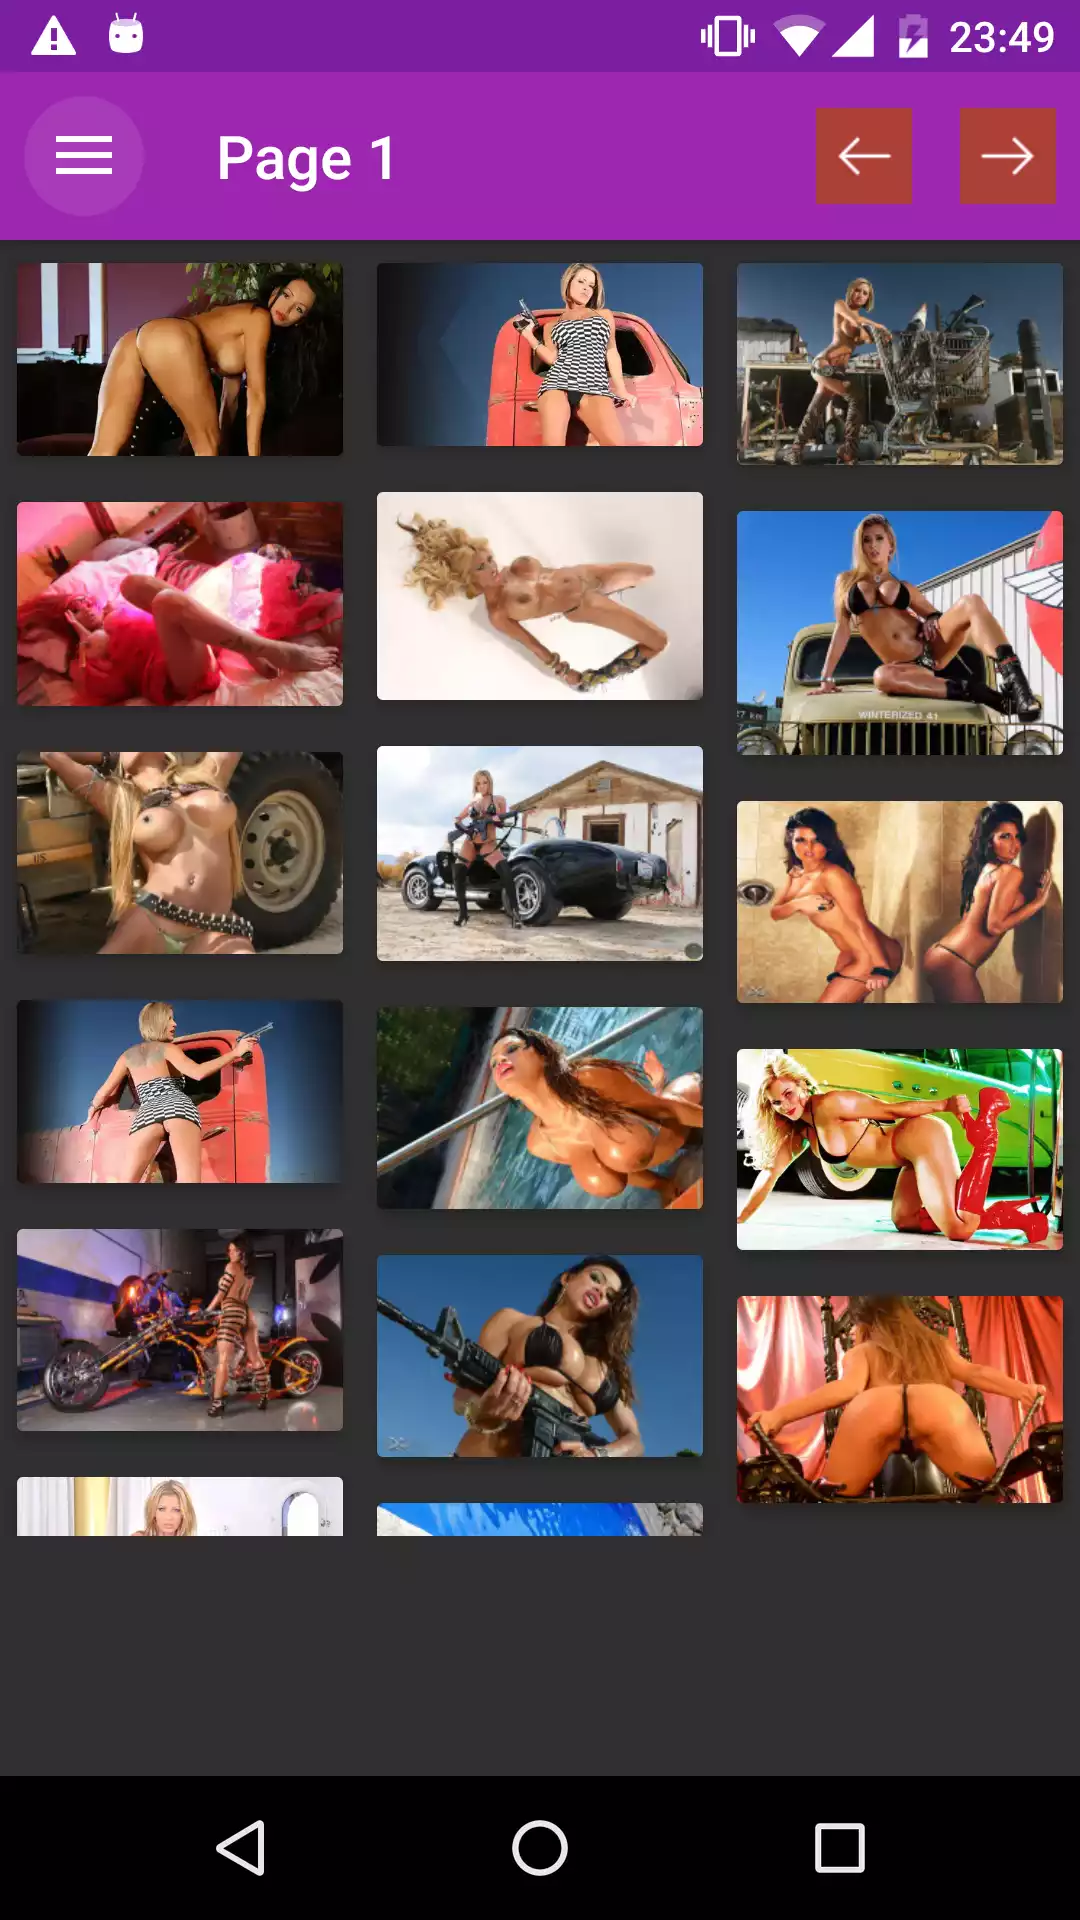 Action Wallpapers apps,apk,offline,time,porn,galleries,erotic,photo,updates,hantai,punishment,sexy,futanari,application,pornstar,gallery,picture,pic,download,pics,backgrounds,pictures,wallpapers,hentai,app